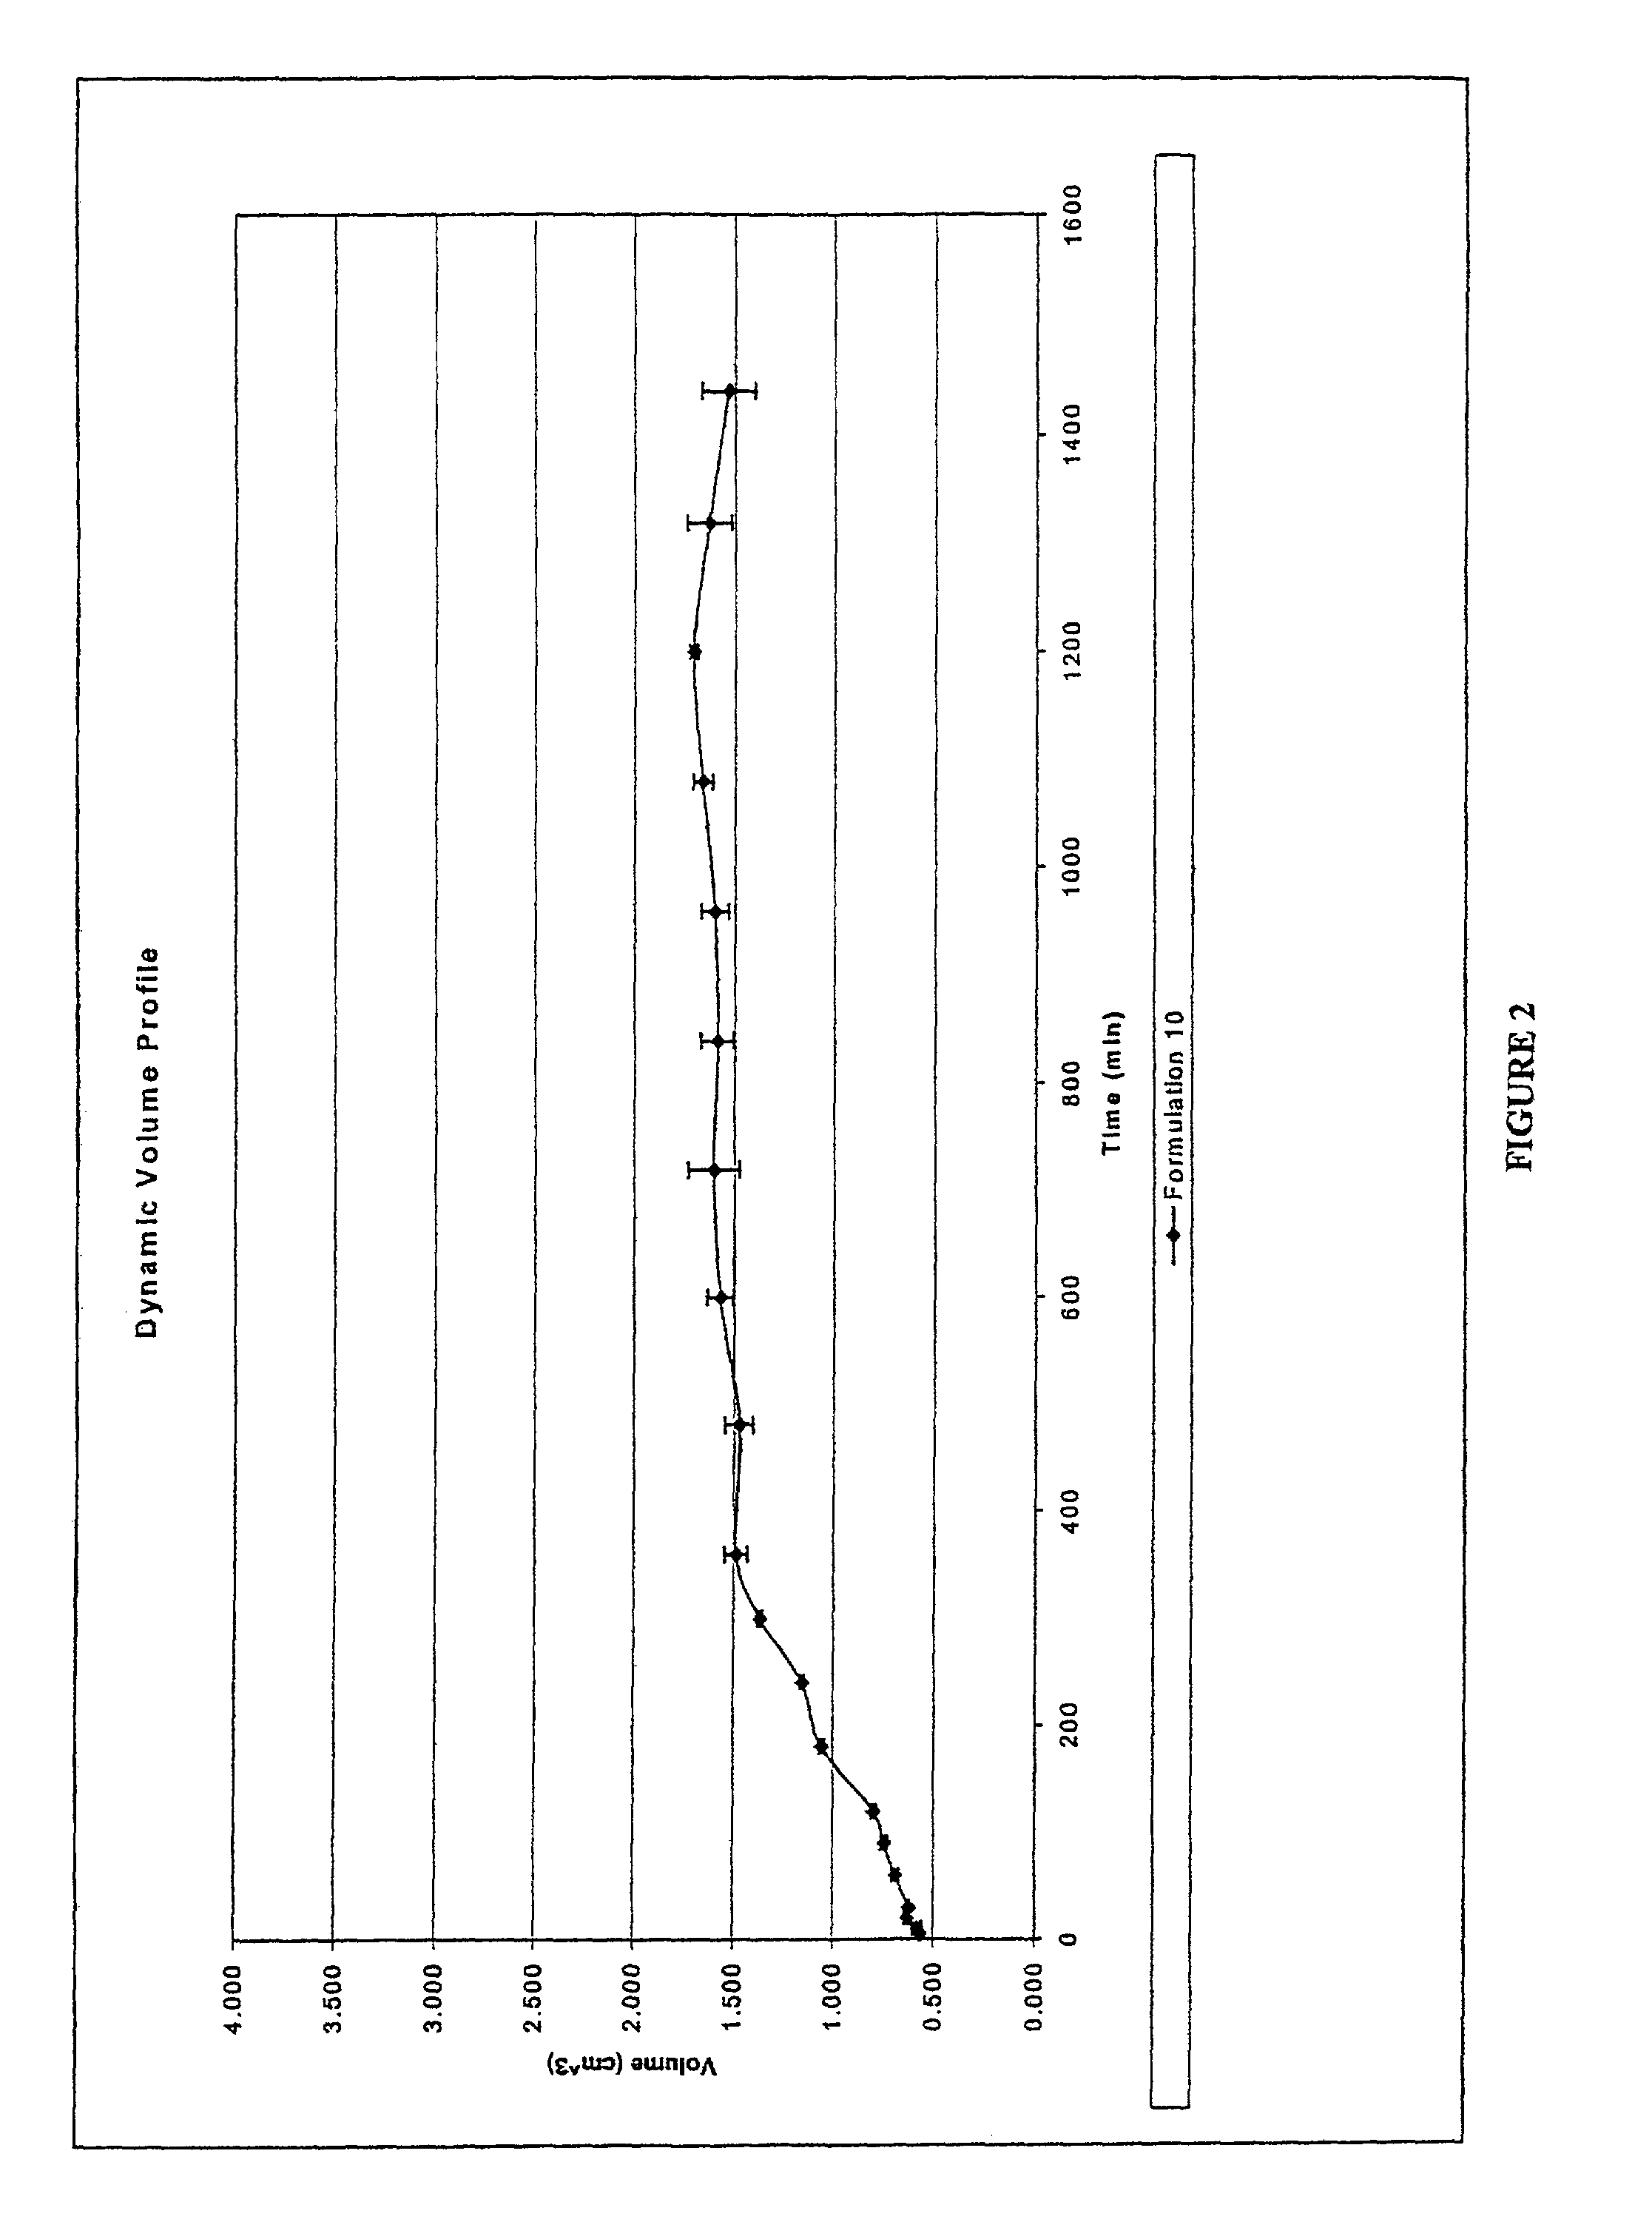 Hydrostatic delivery system for controlled delivery of agent